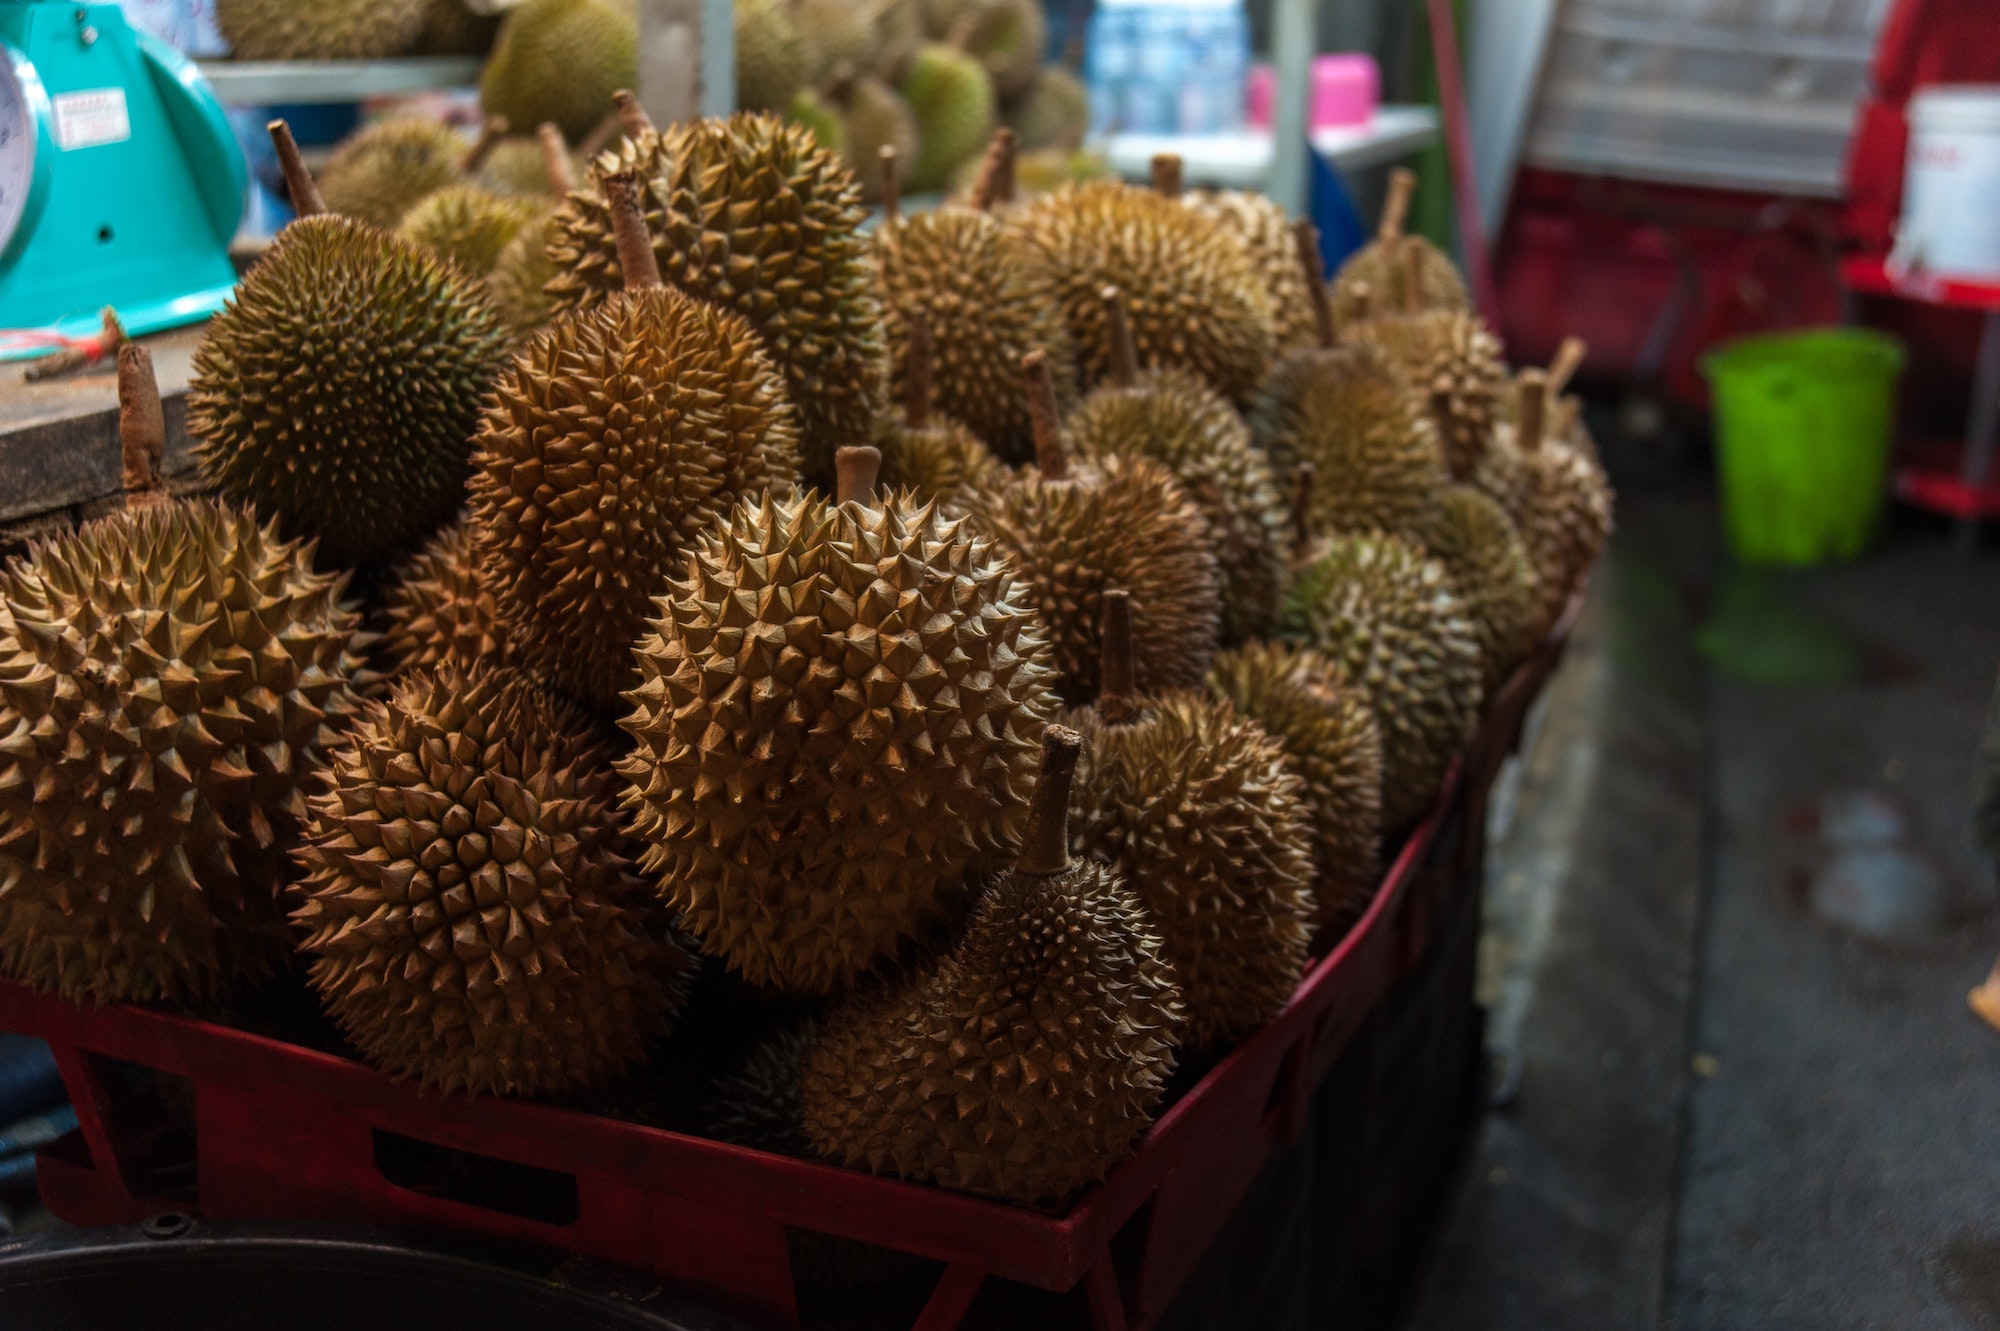 Tropical fruit of durian at the night market